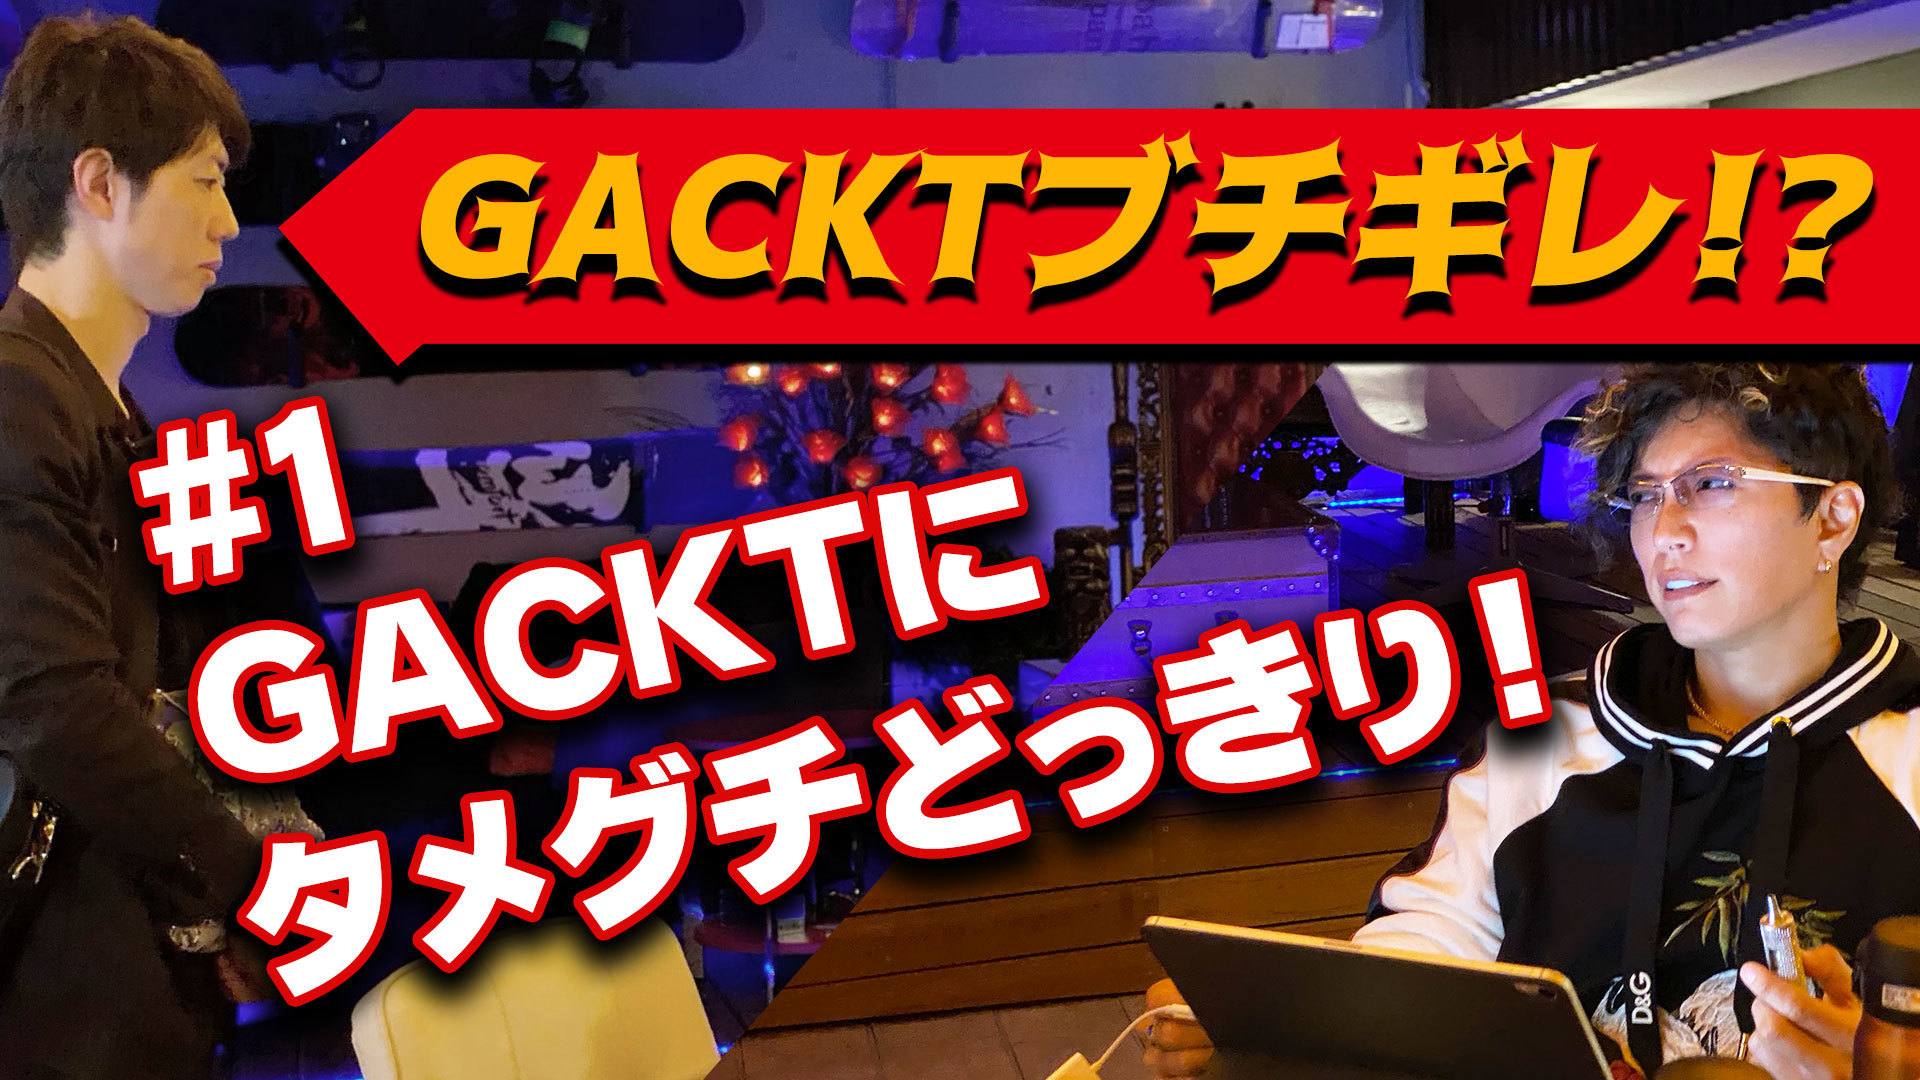 GACKT OFFICIAL YOUTUBE『がくちゃん』第１弾配信開始！ | GACKT ...